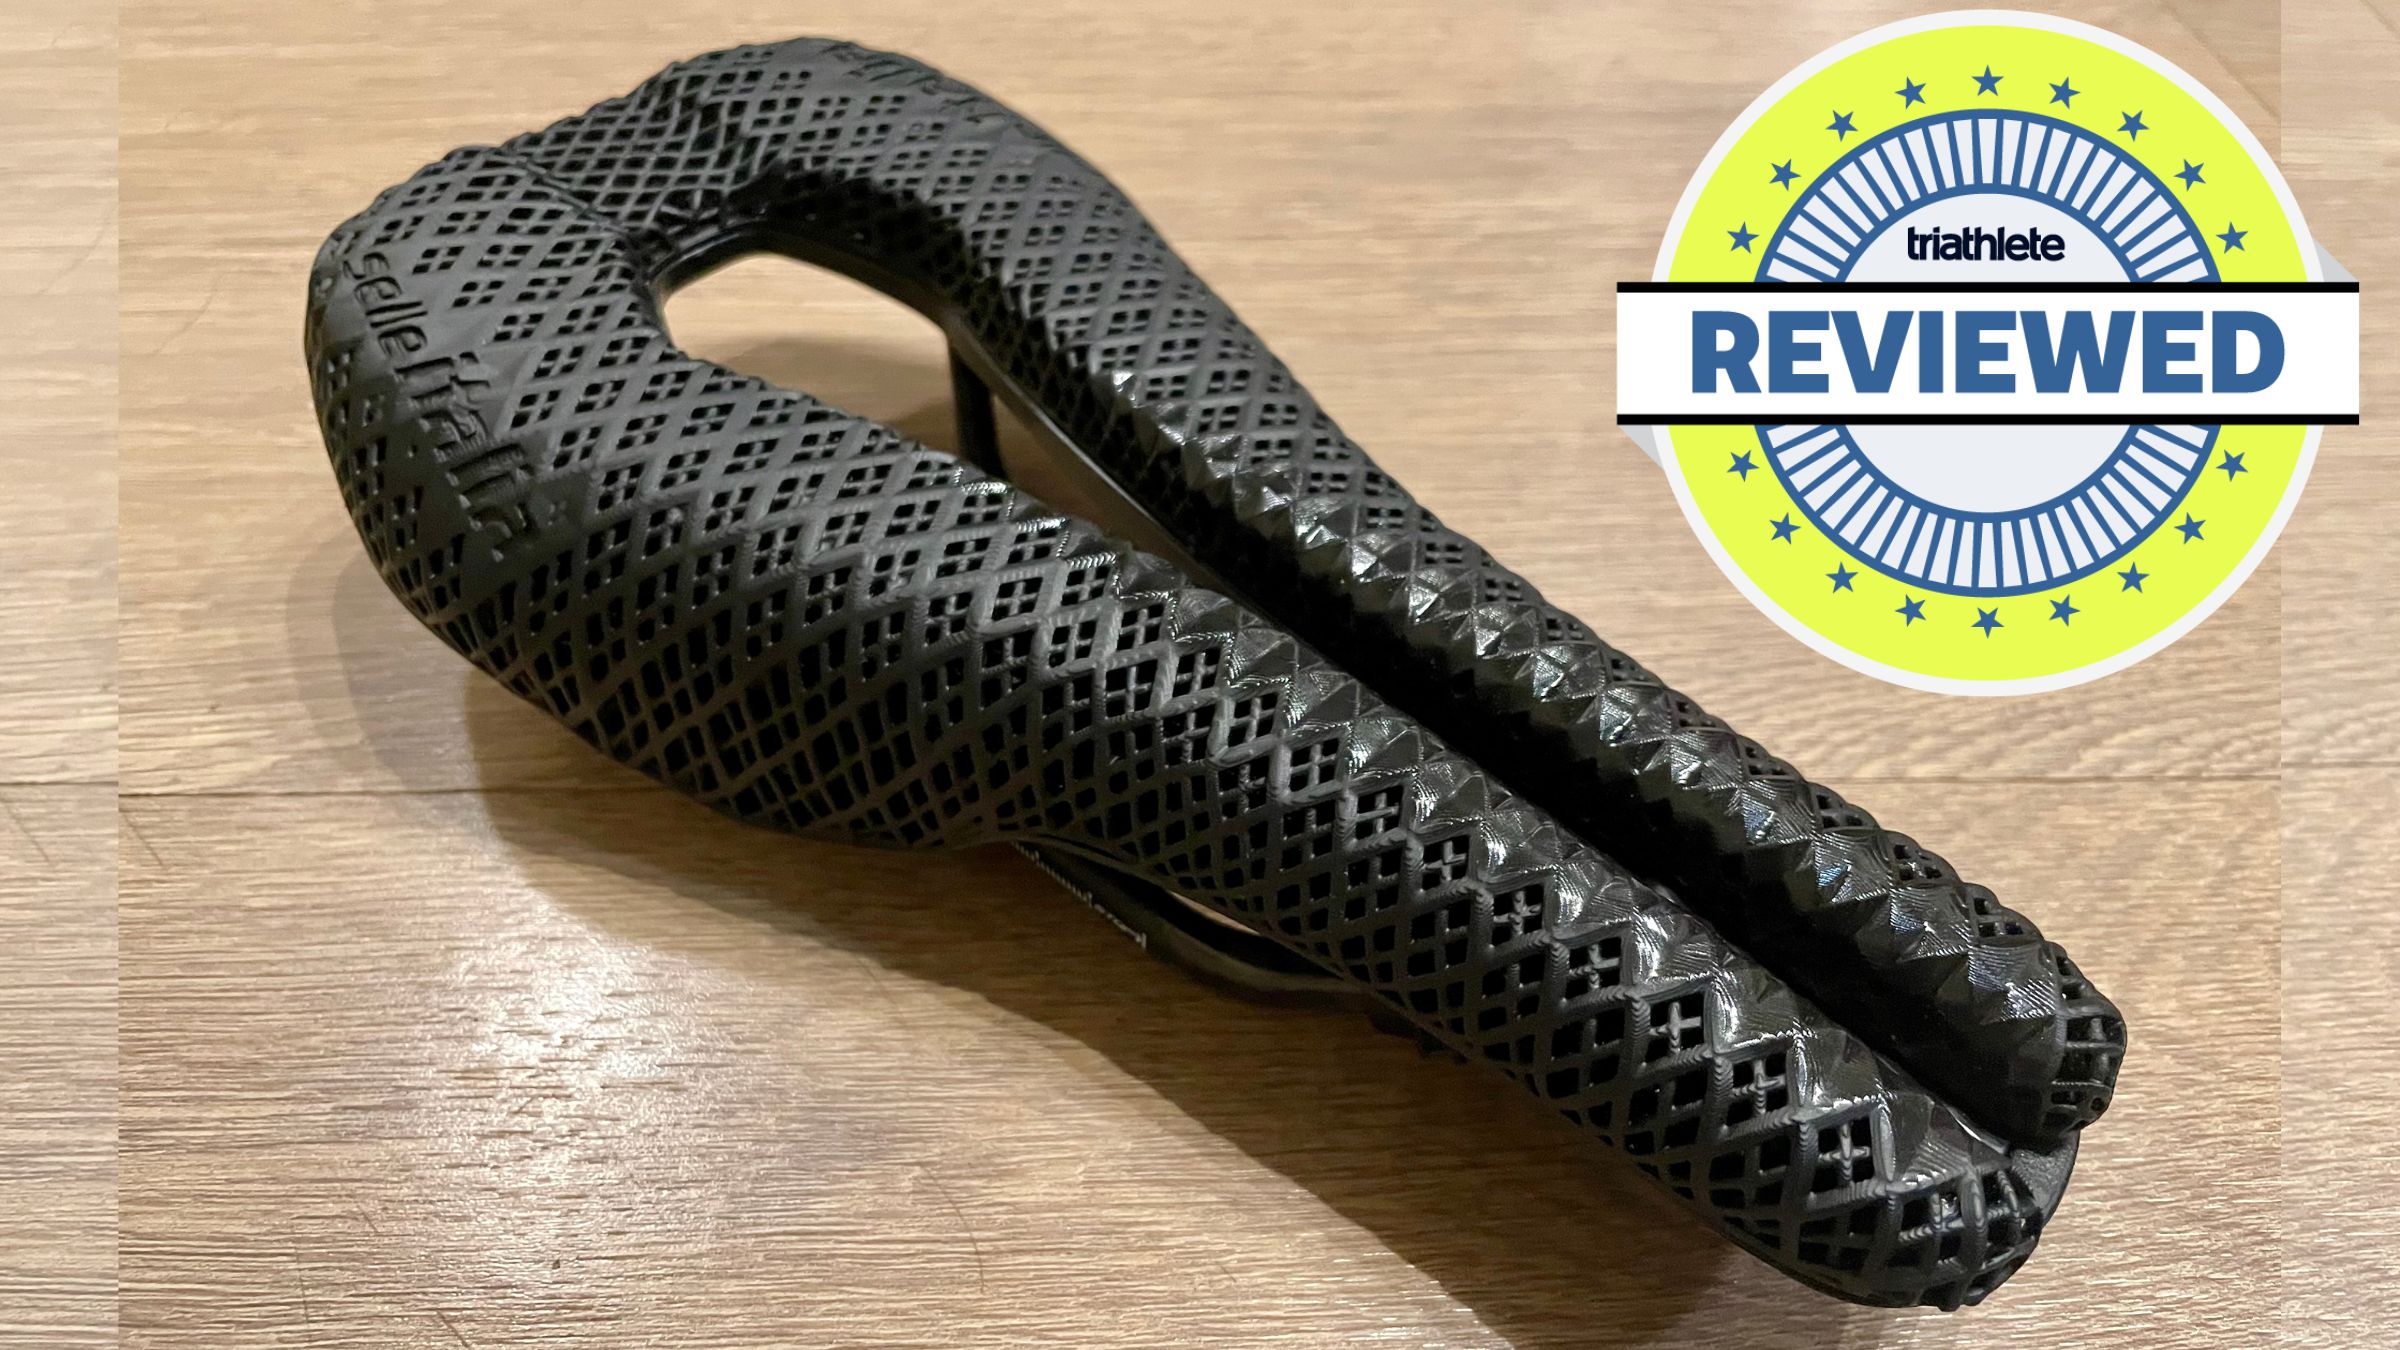 Review: Selle Italia SLR Boost 3D TI 316 Superflow Saddle - PezCycling News